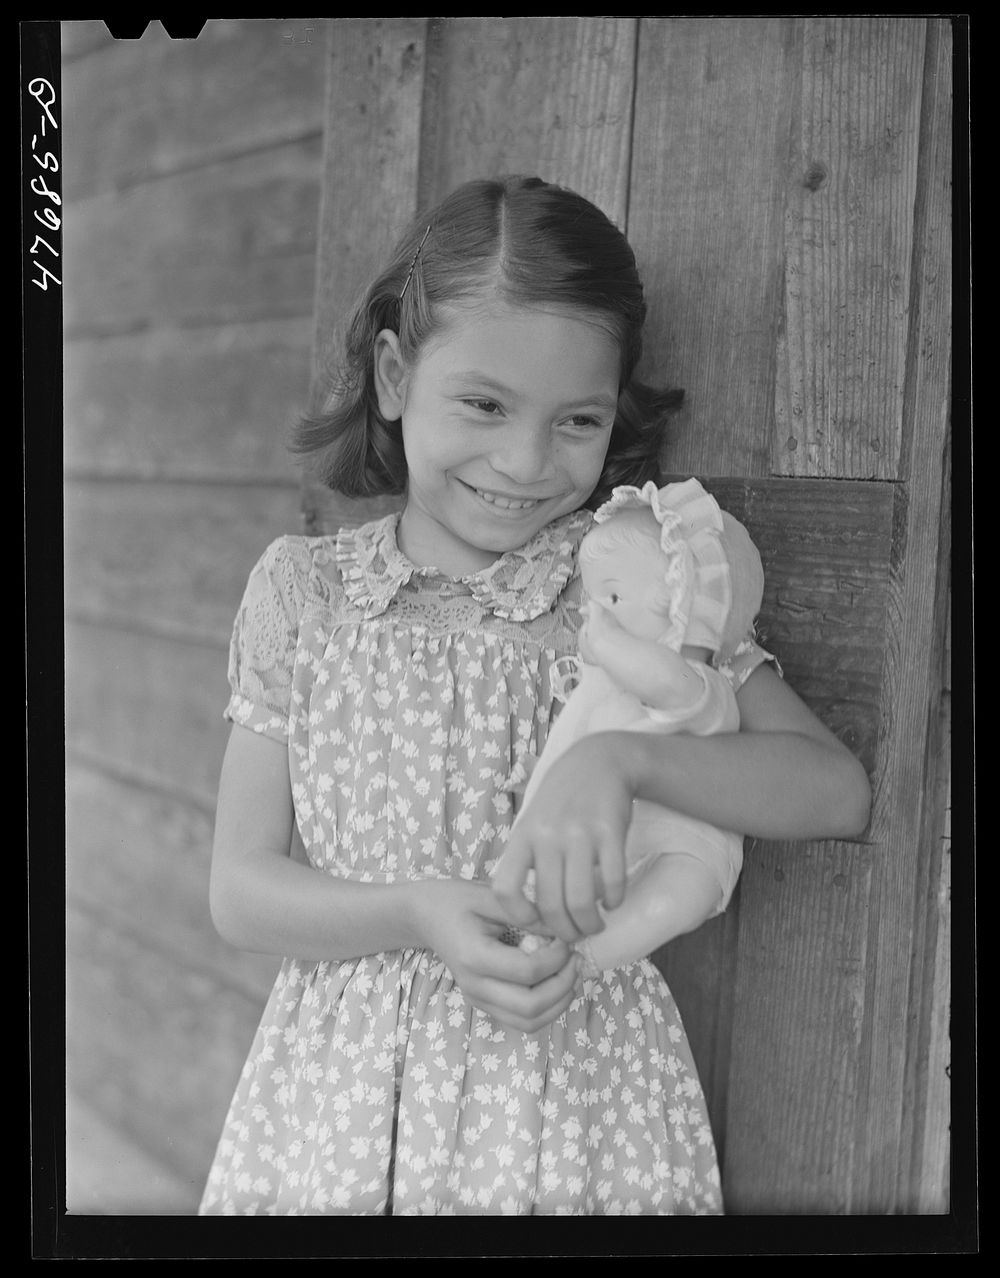 [Untitled photo, possibly related to: Guanica, Puerto Rico (vicinity). One of the children of a tenant farmer and her Three…